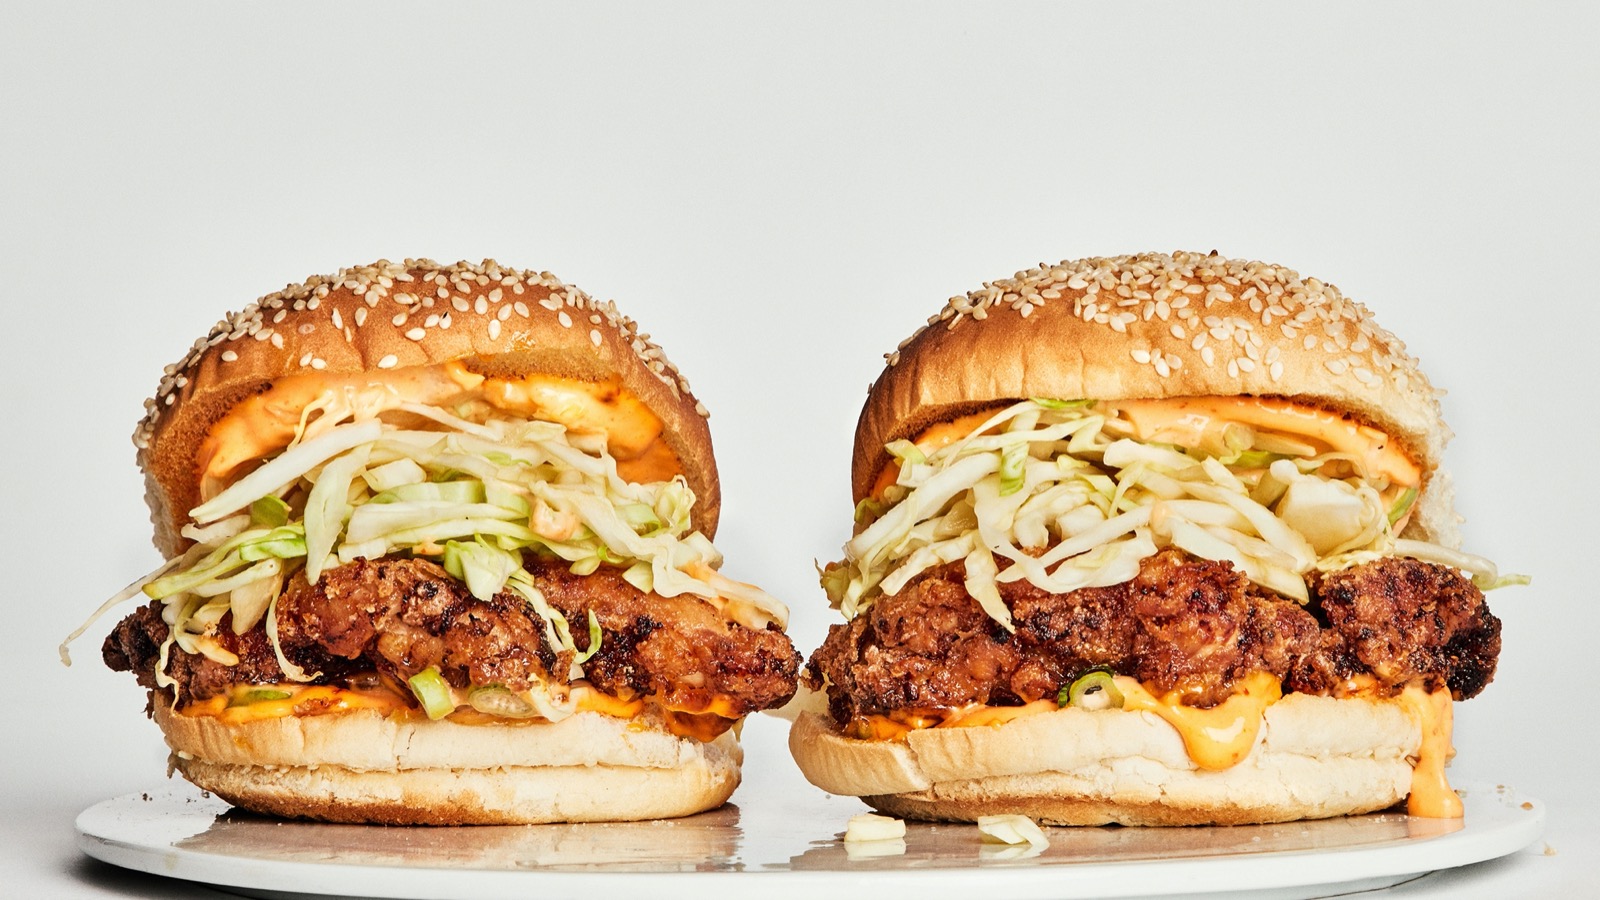 Say Yum Or Yuck to Sandwiches & I'll Guess Your Age Quiz Fried chicken sandwich